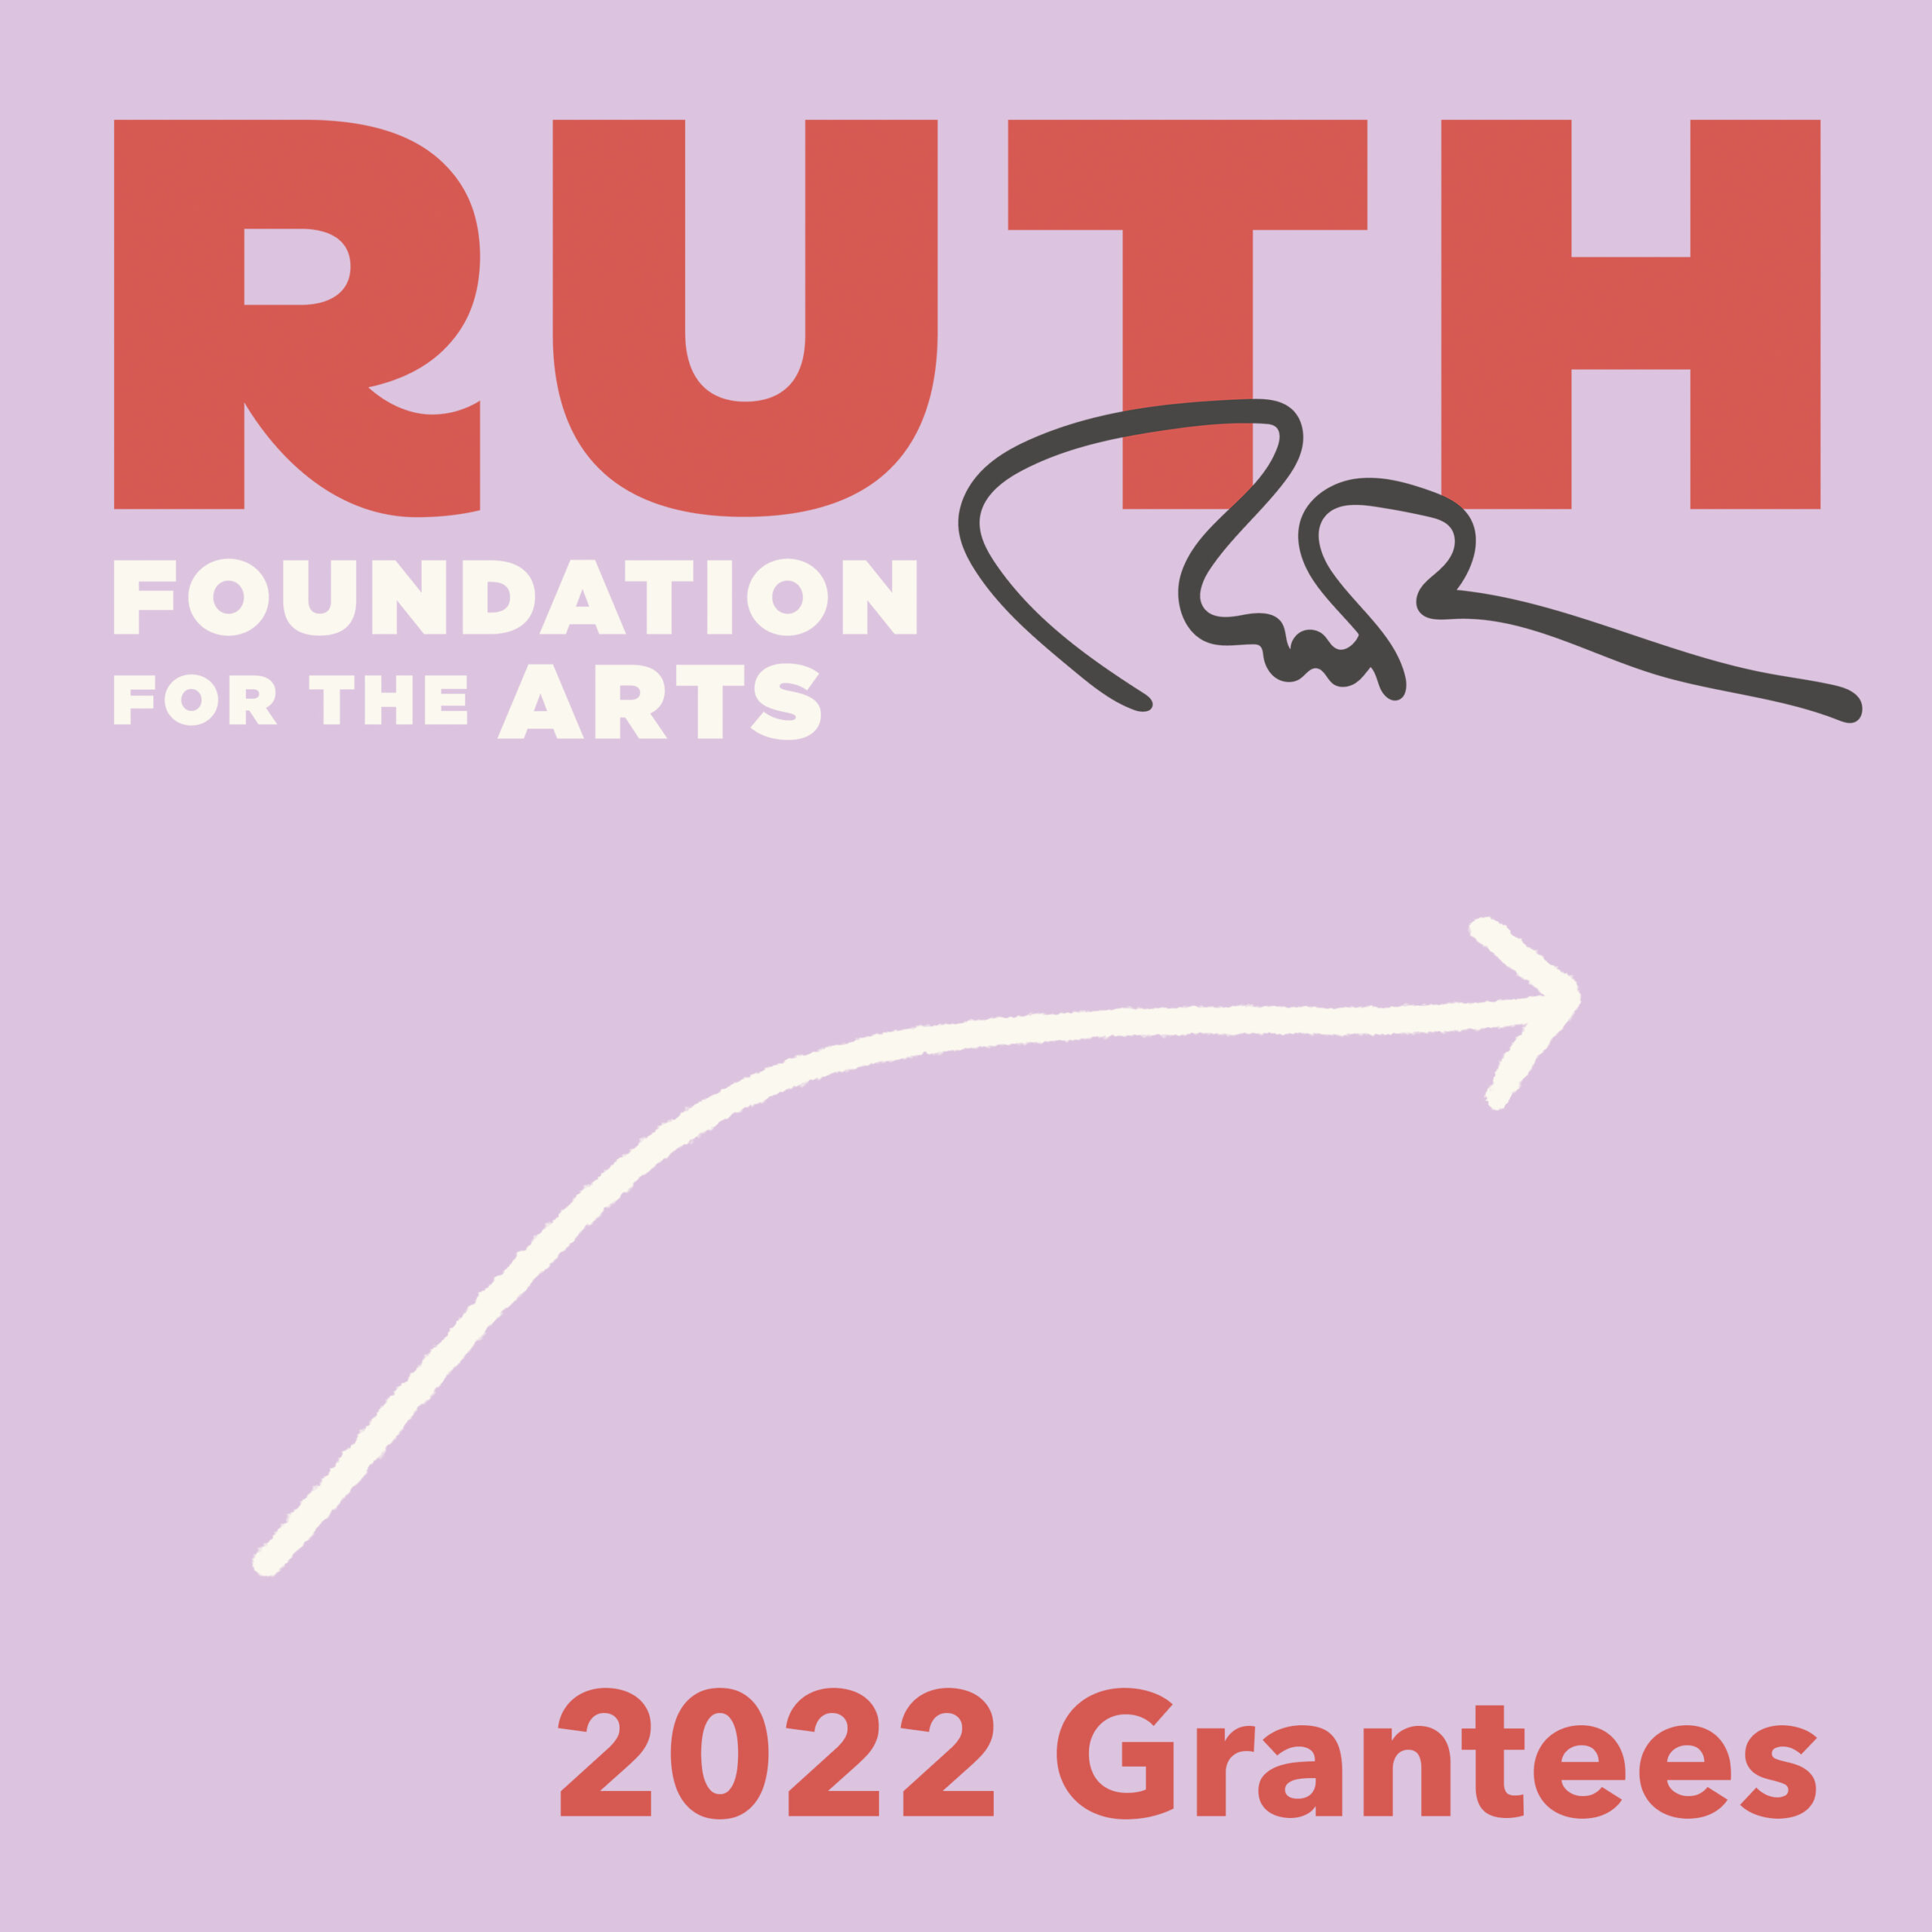 Thumbnail for the post titled: Pike School of Art — Mississippi Receives Grant from Ruth Foundation for the Arts